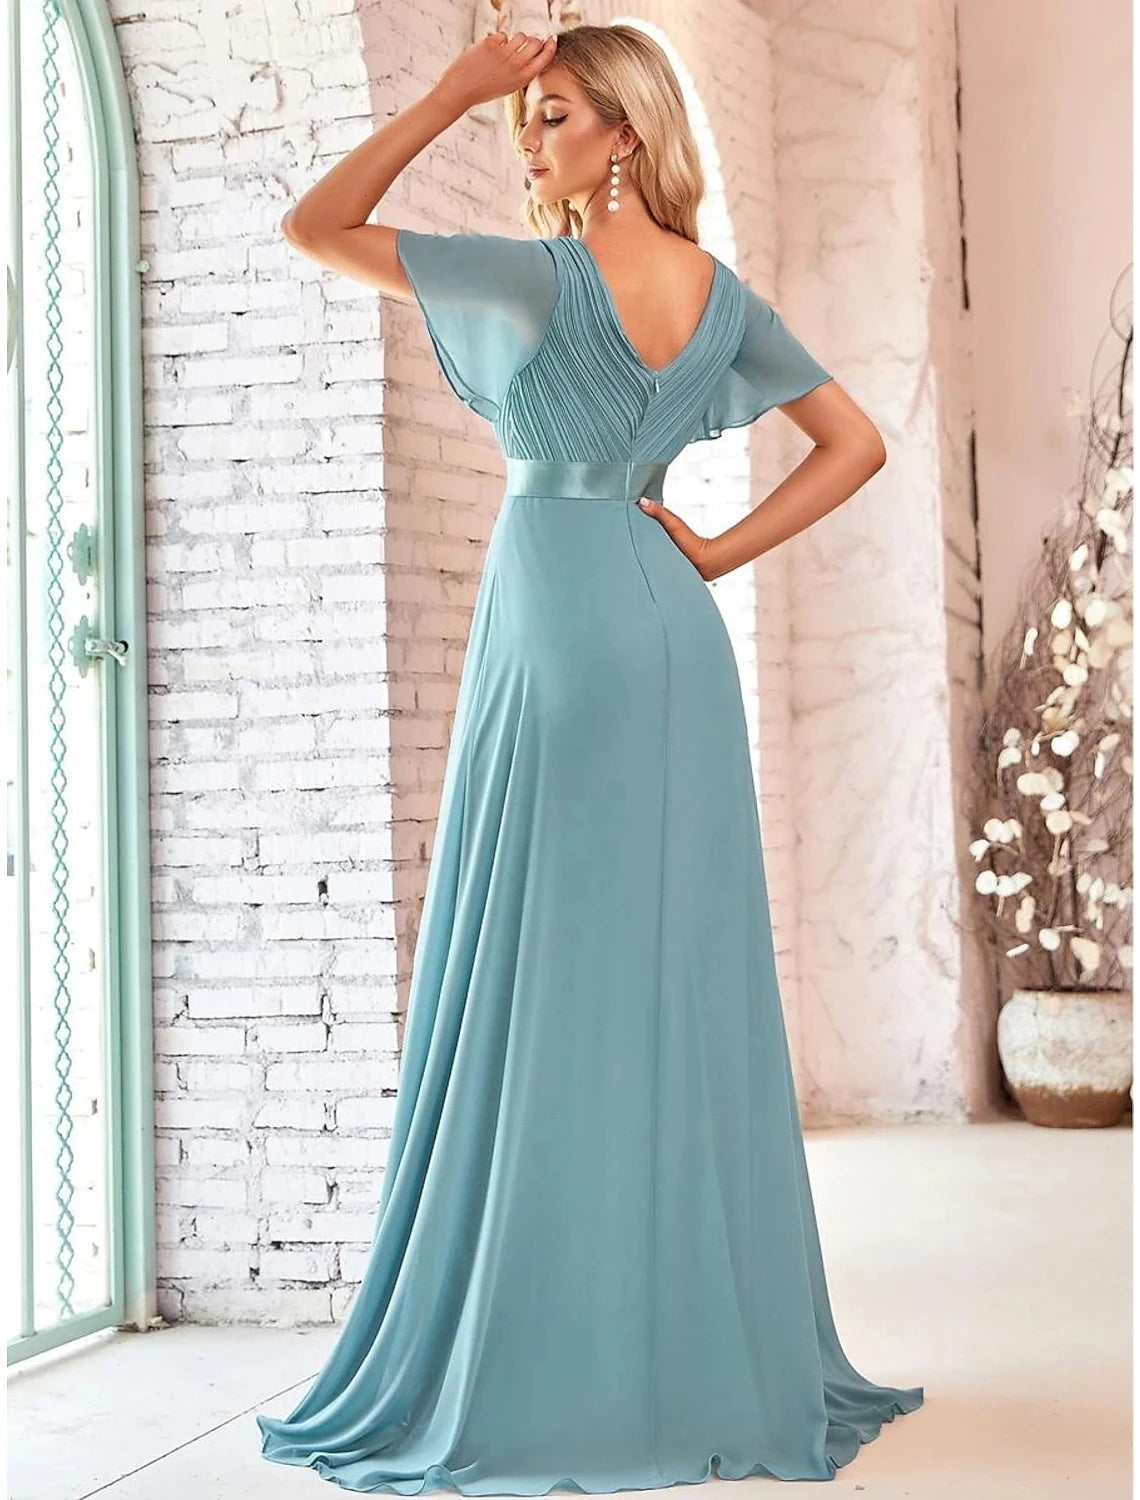 A-Line Evening Gown Party Dress Empire Dress Wedding Guest Formal Evening Floor Length Short Sleeve V Neck Bridesmaid Dress Chiffon V Back with Ruffles Pure Color